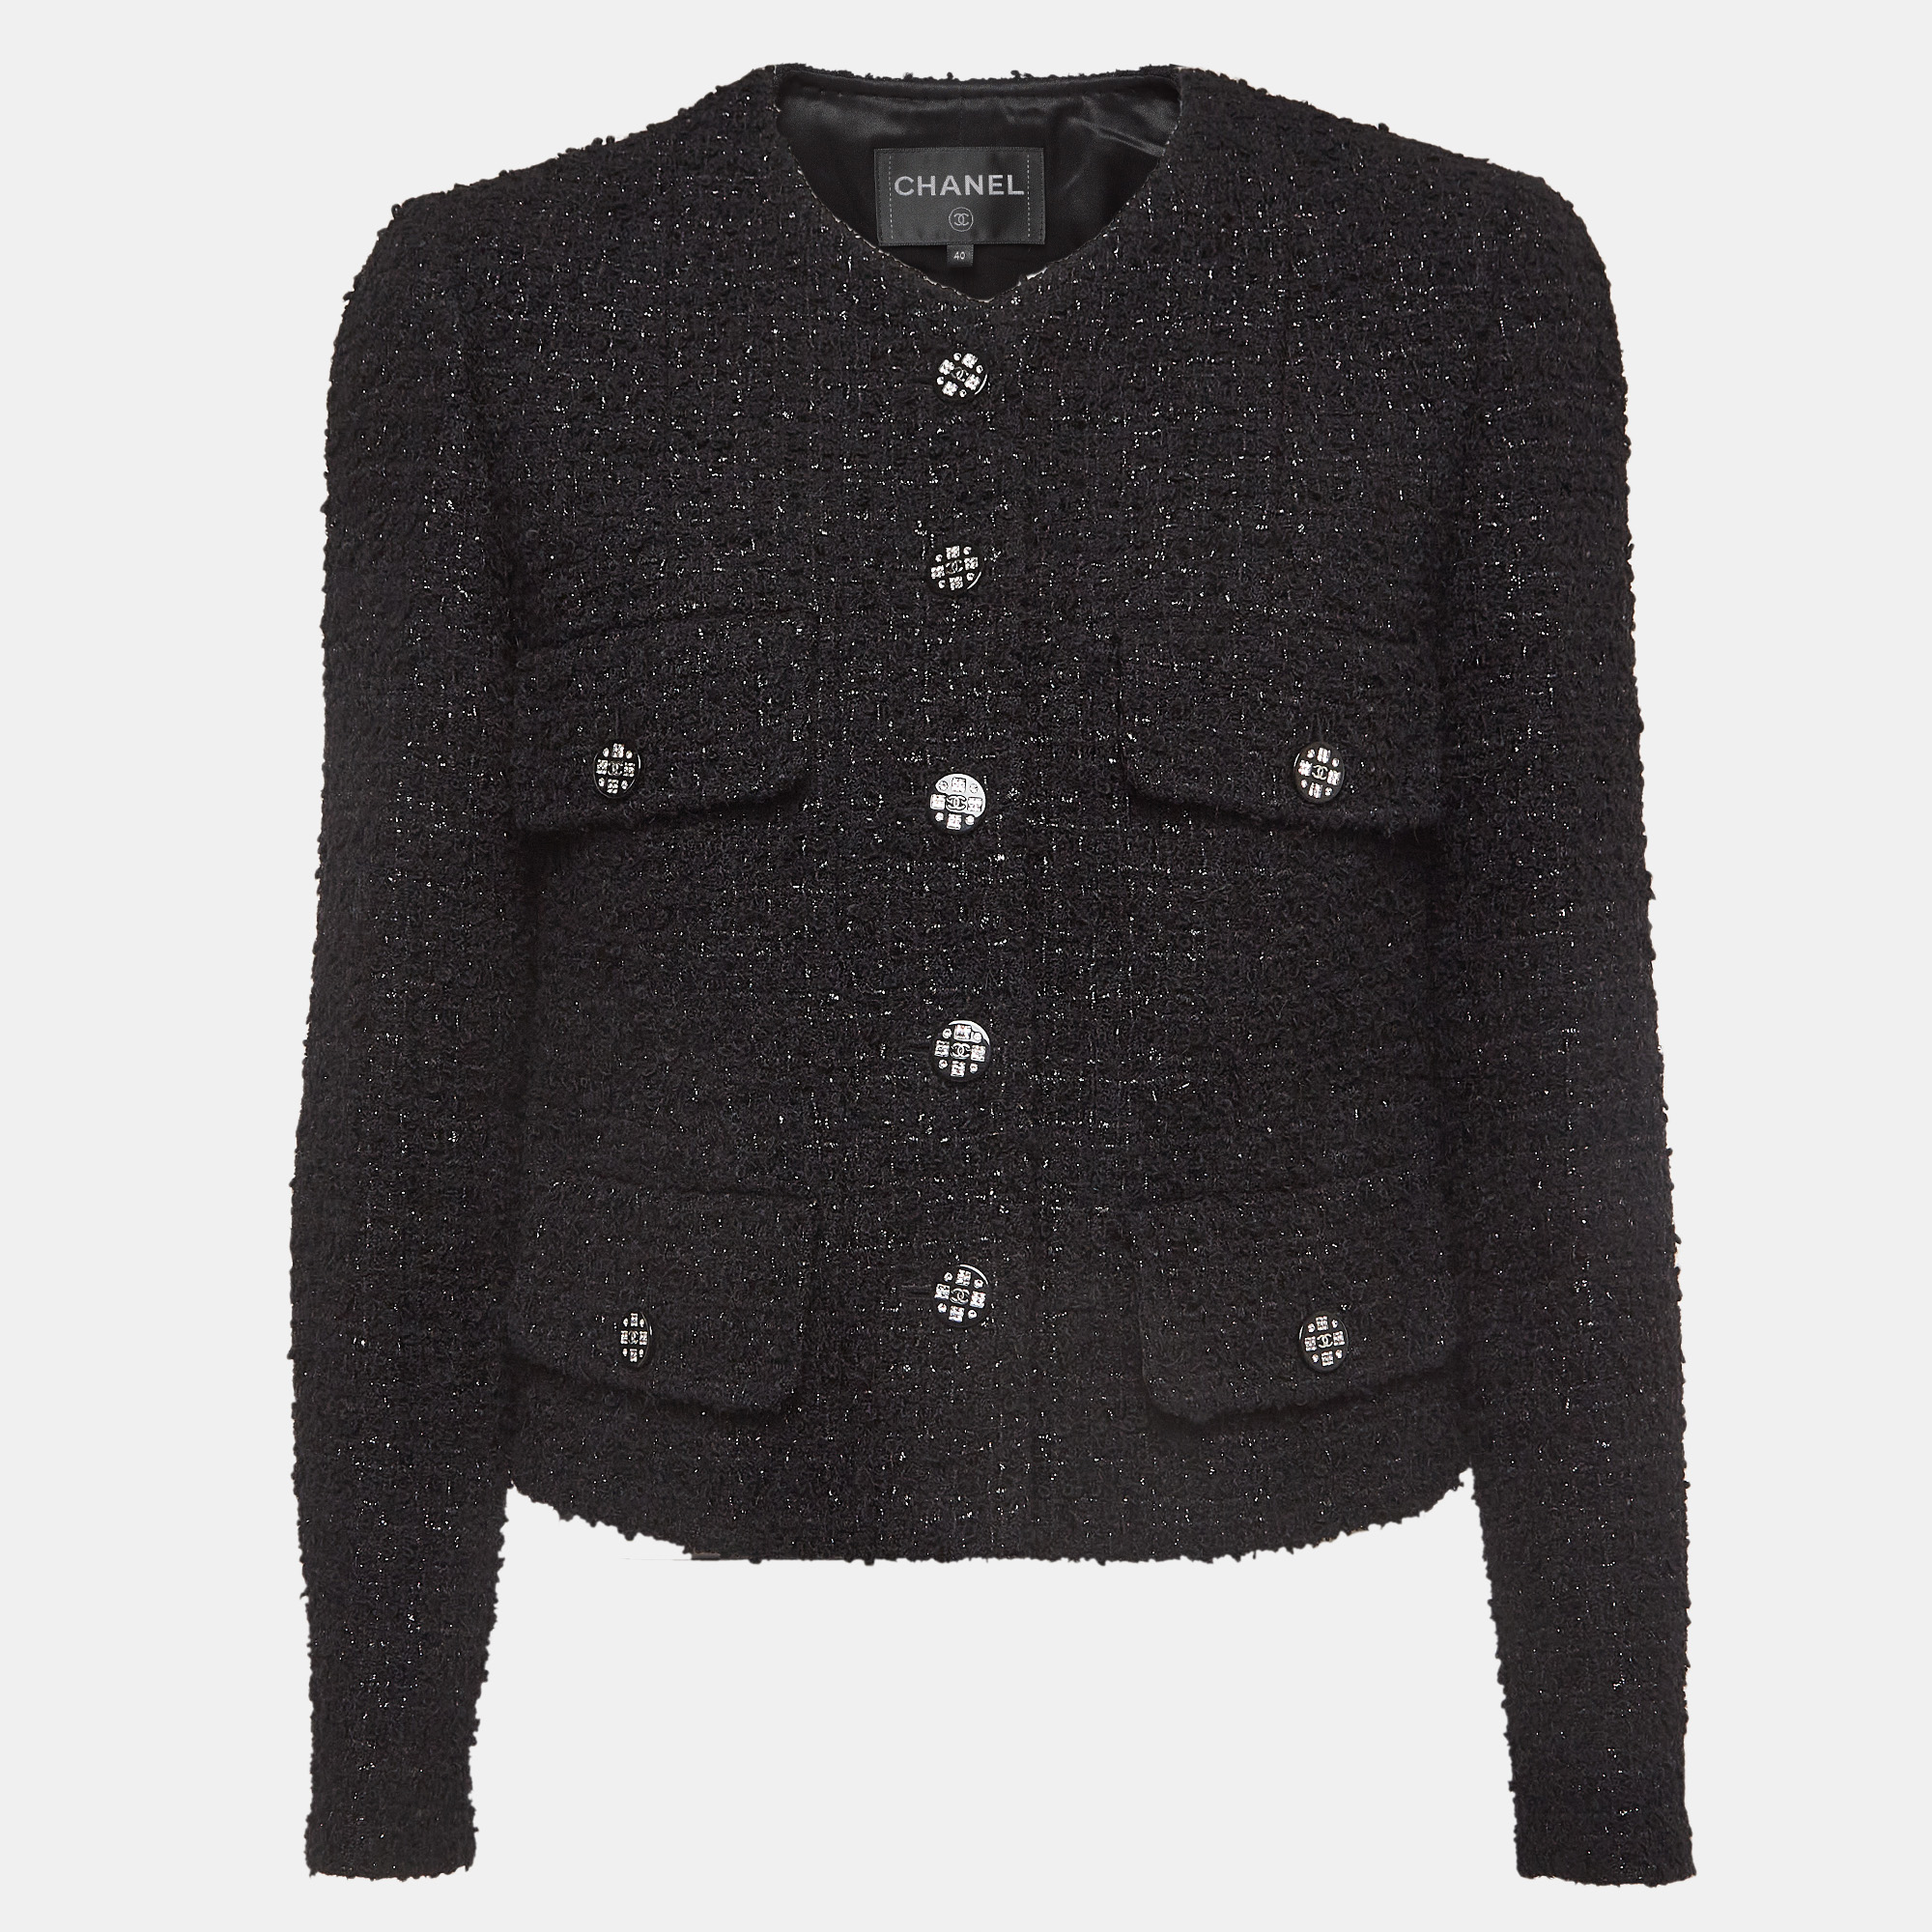 

Chanel Black Tweed Buttoned Jacket